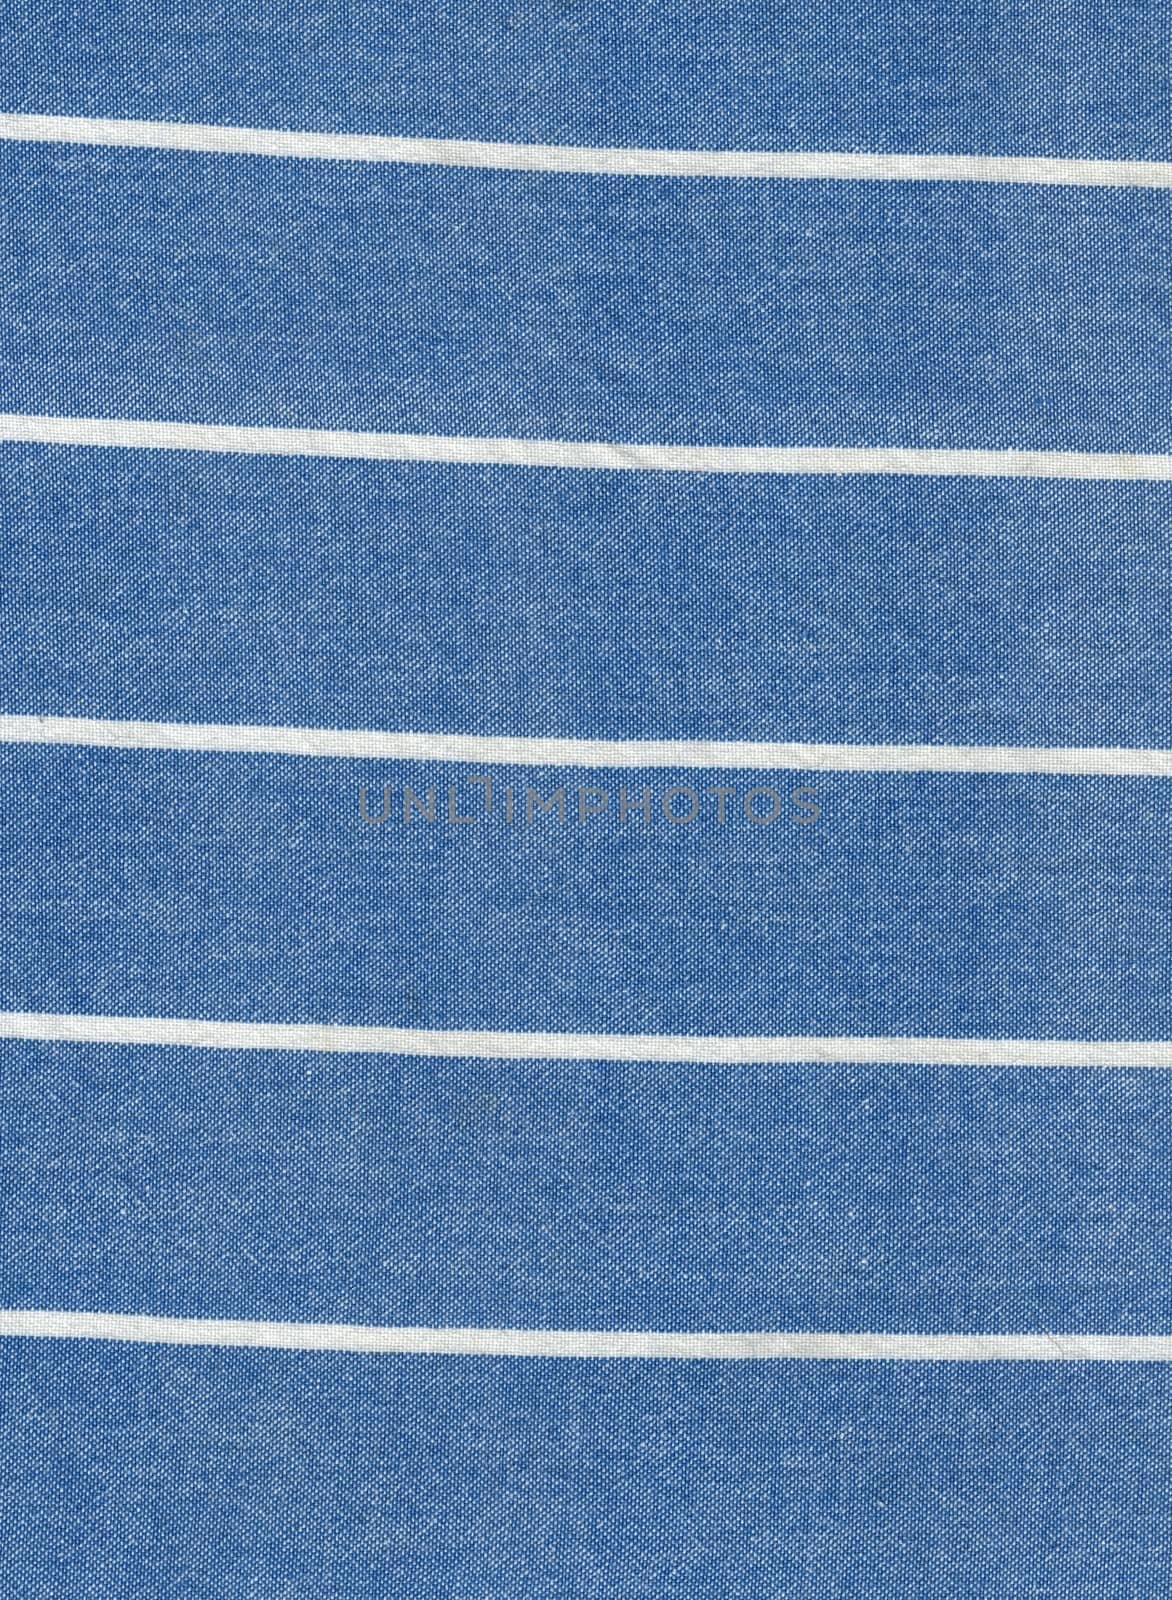 blue fabric cloth with white lines